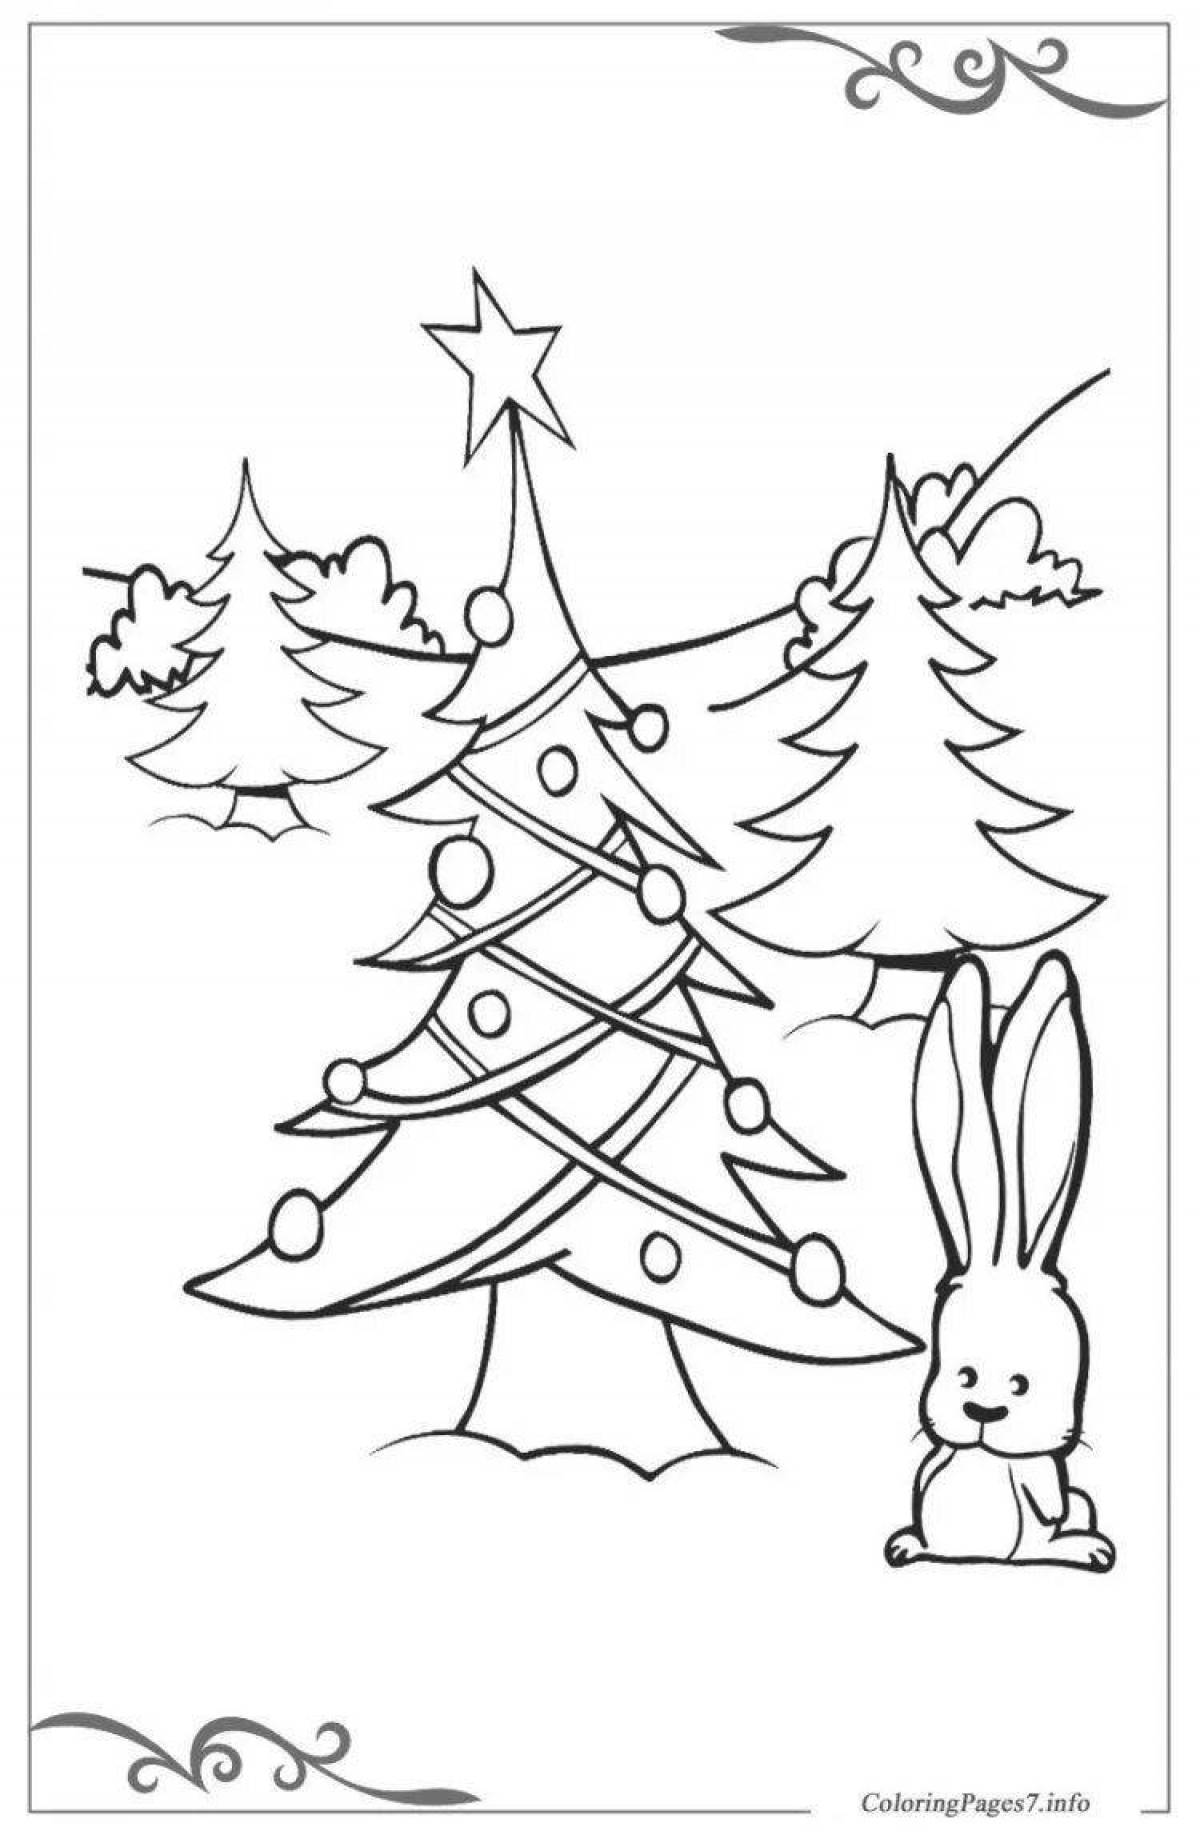 Colouring serene hare and tree